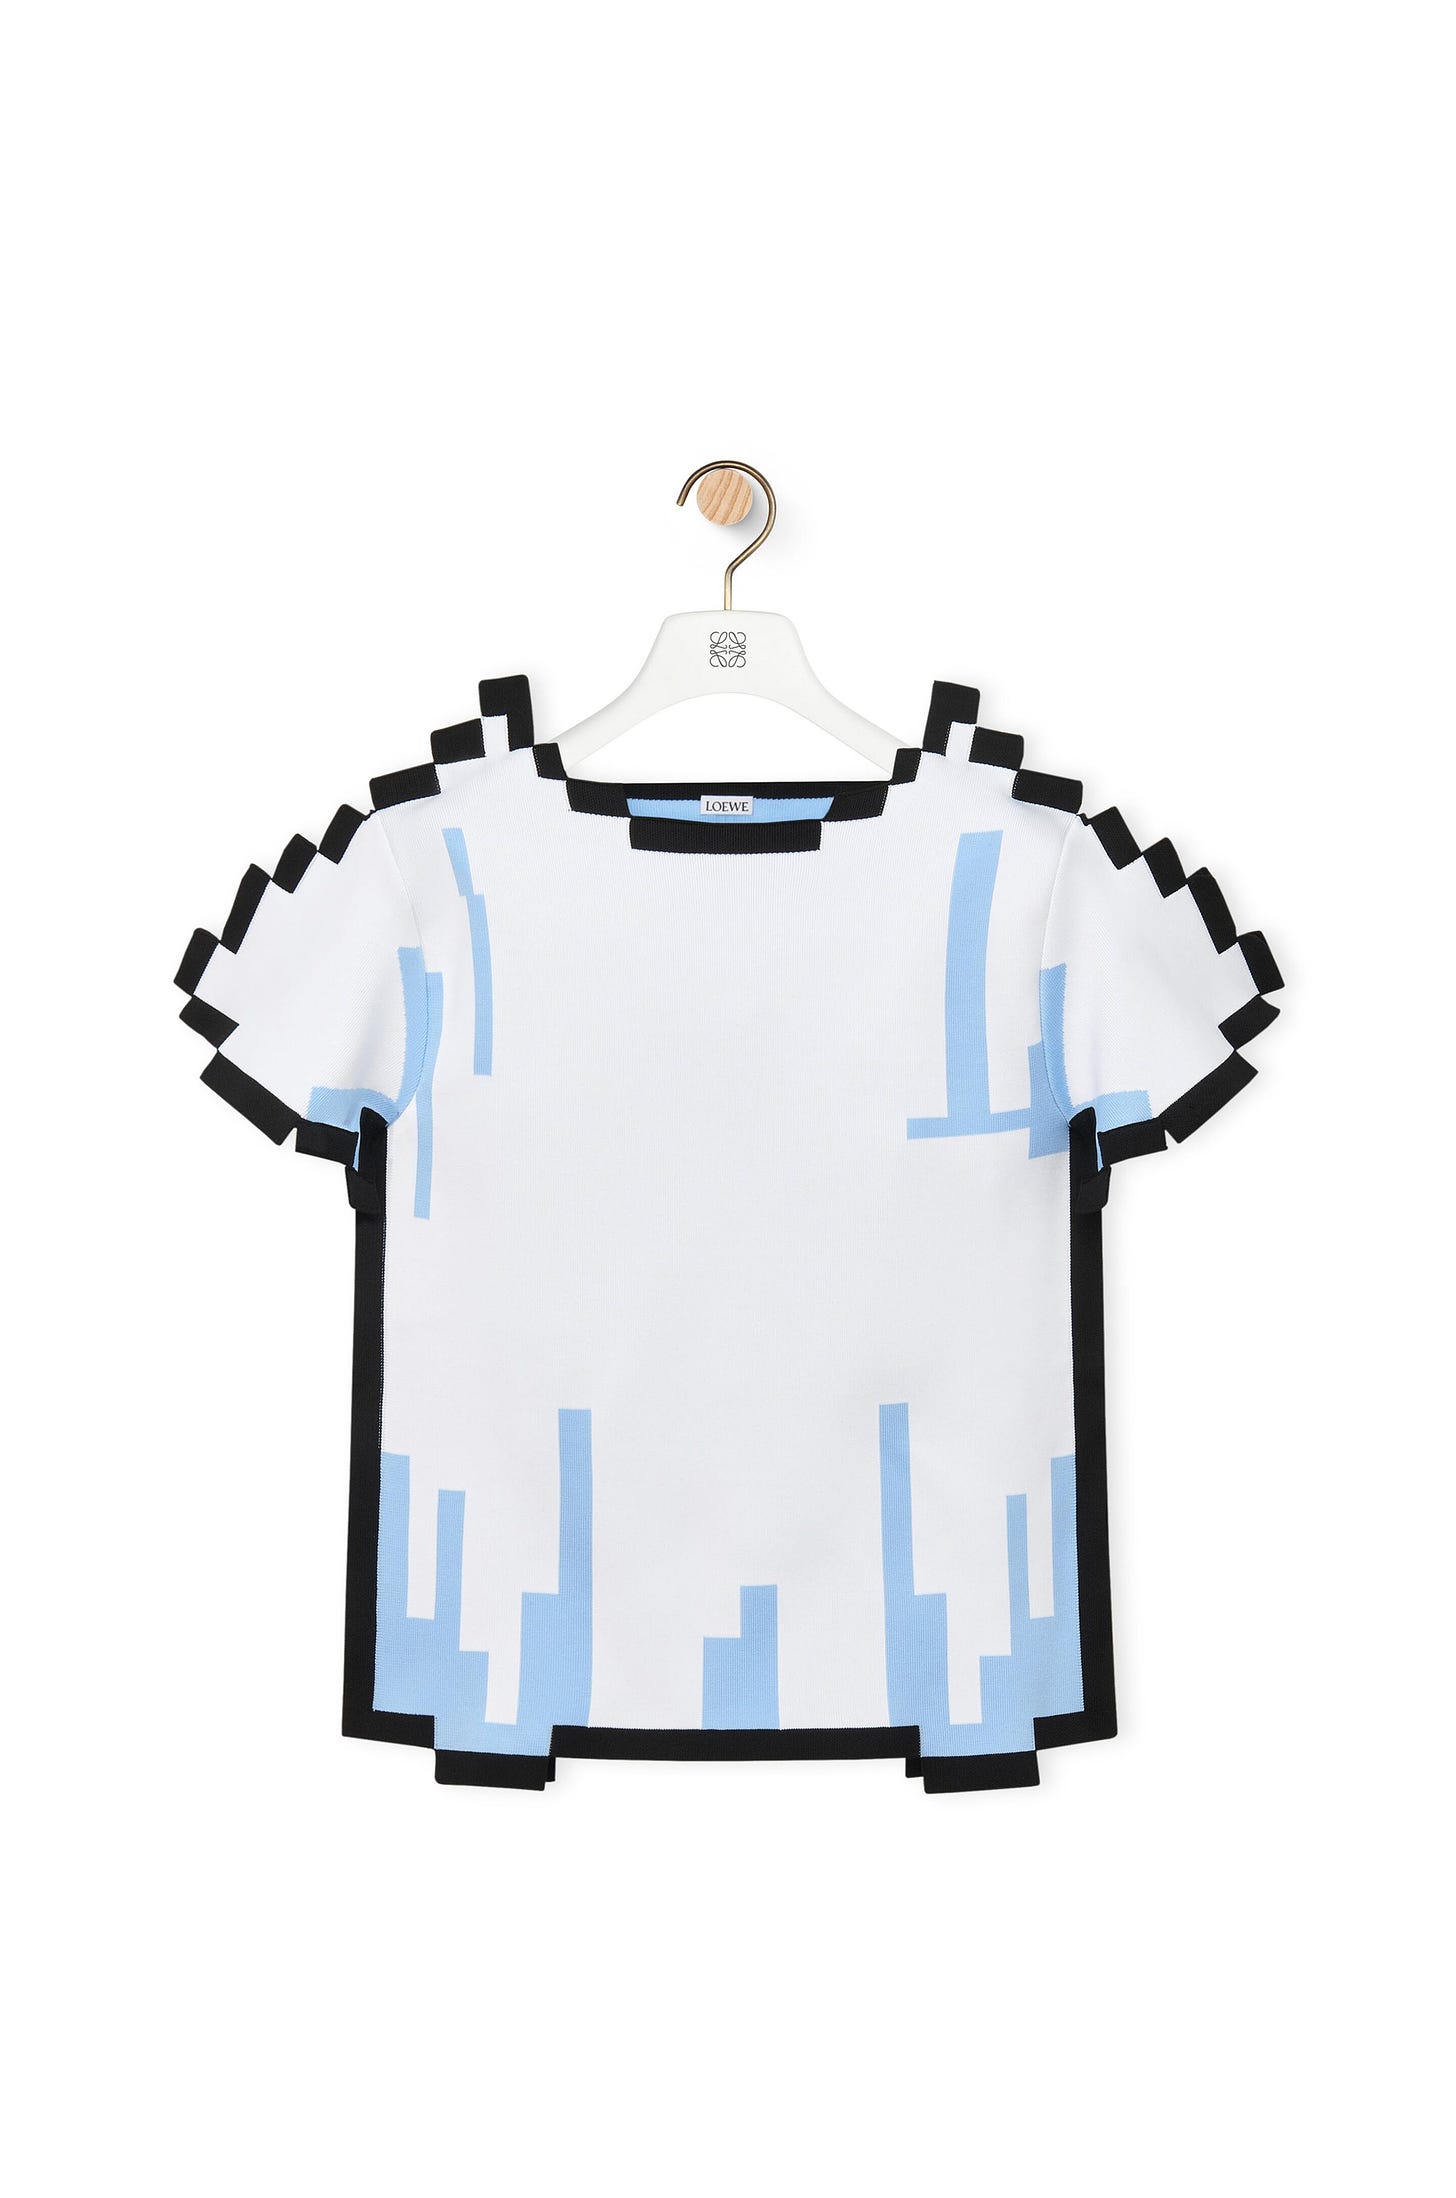 A pixelated T-shirt product image from Loewe